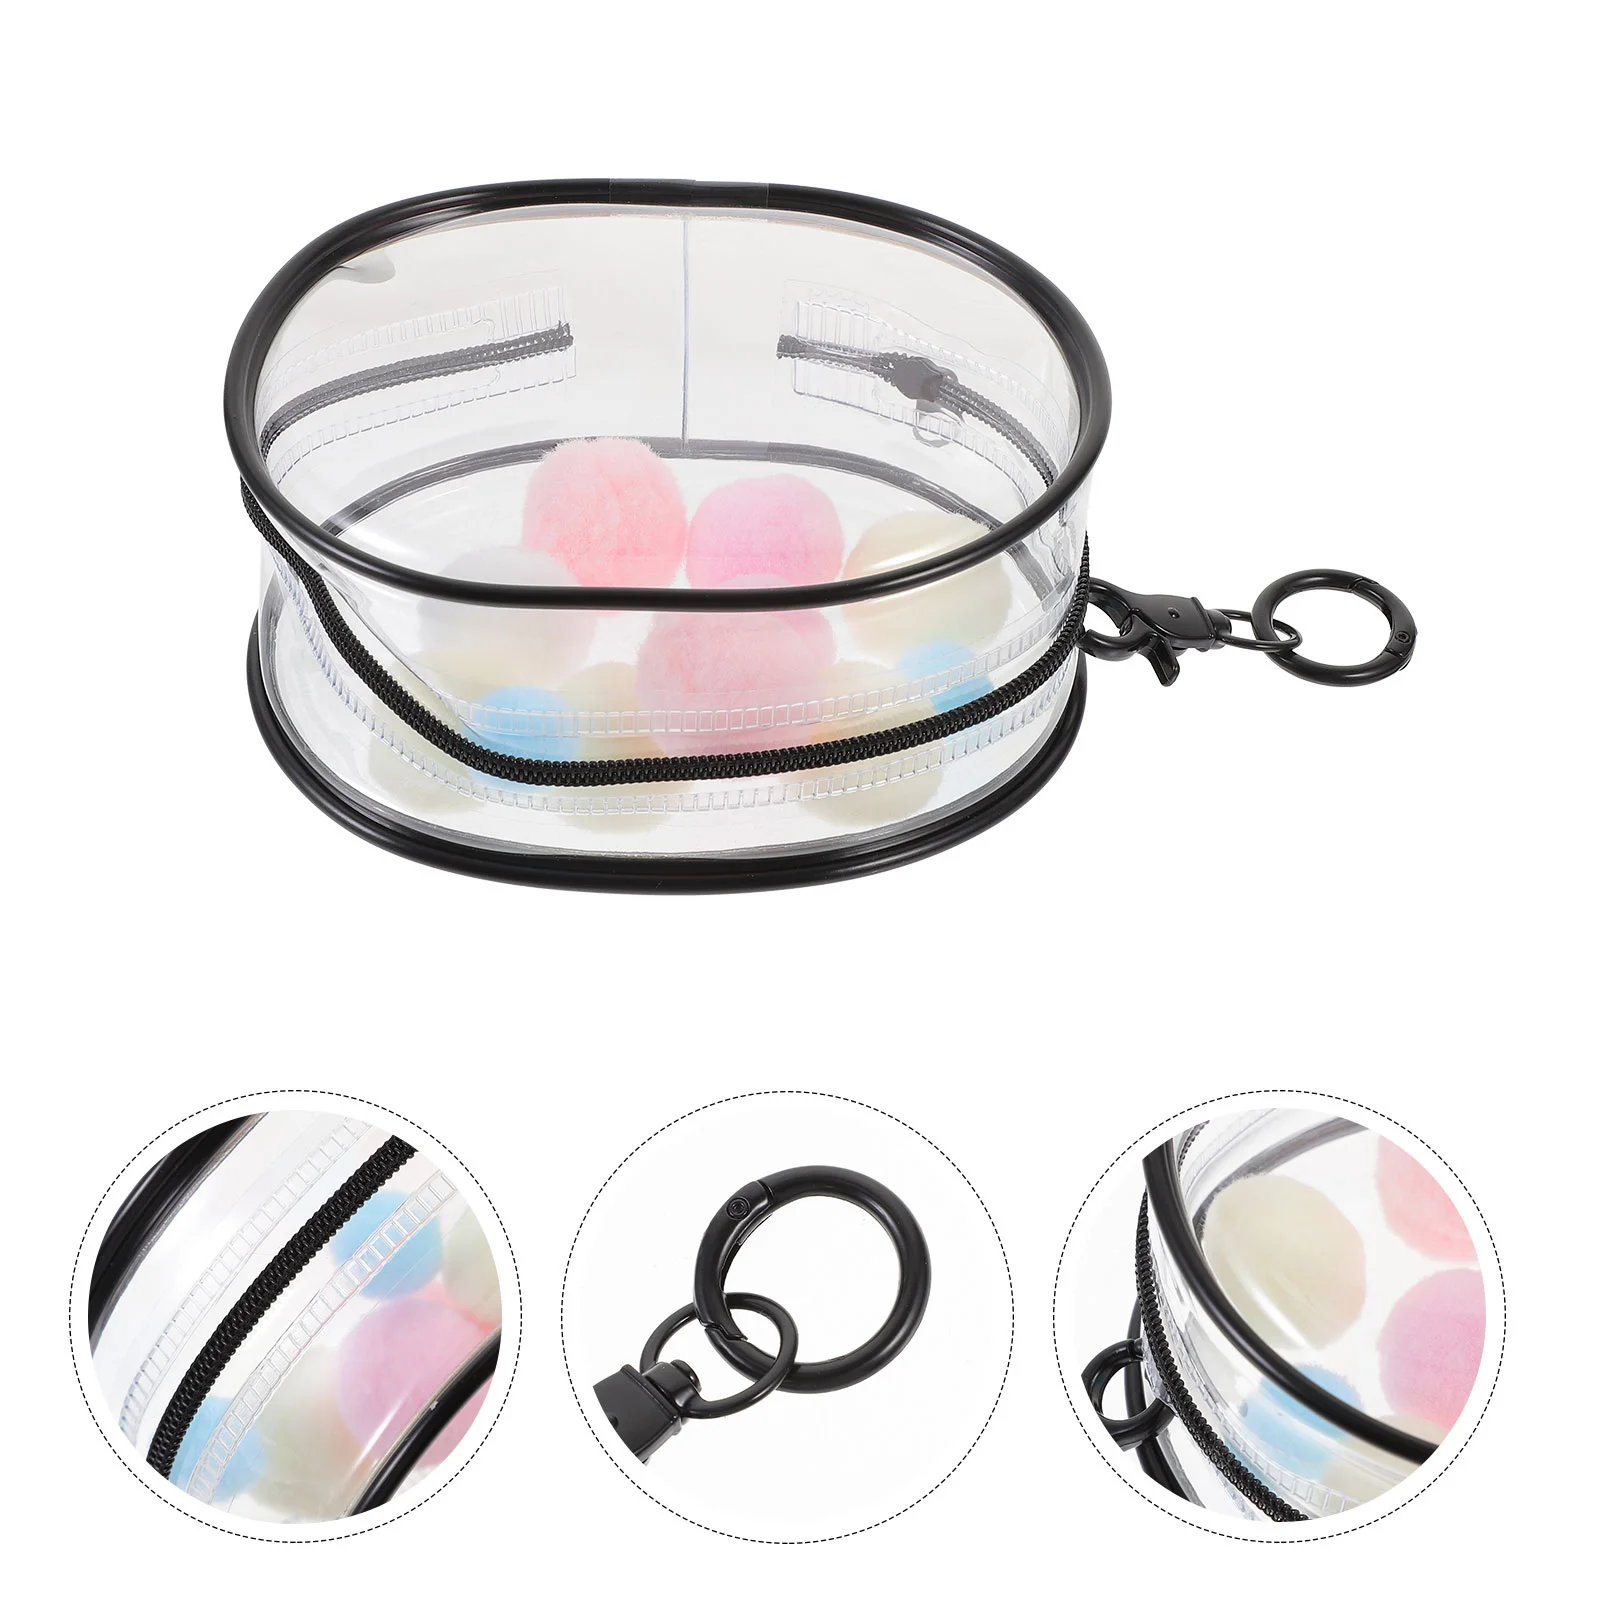 clear display case keychain small dolls pouch figures portable storage hanging bag zipper closure keychain charms Clear Display Case Keychain Mini Bag Figures Portable Storage Hanging Bag Zipper Closure Keychain Charms